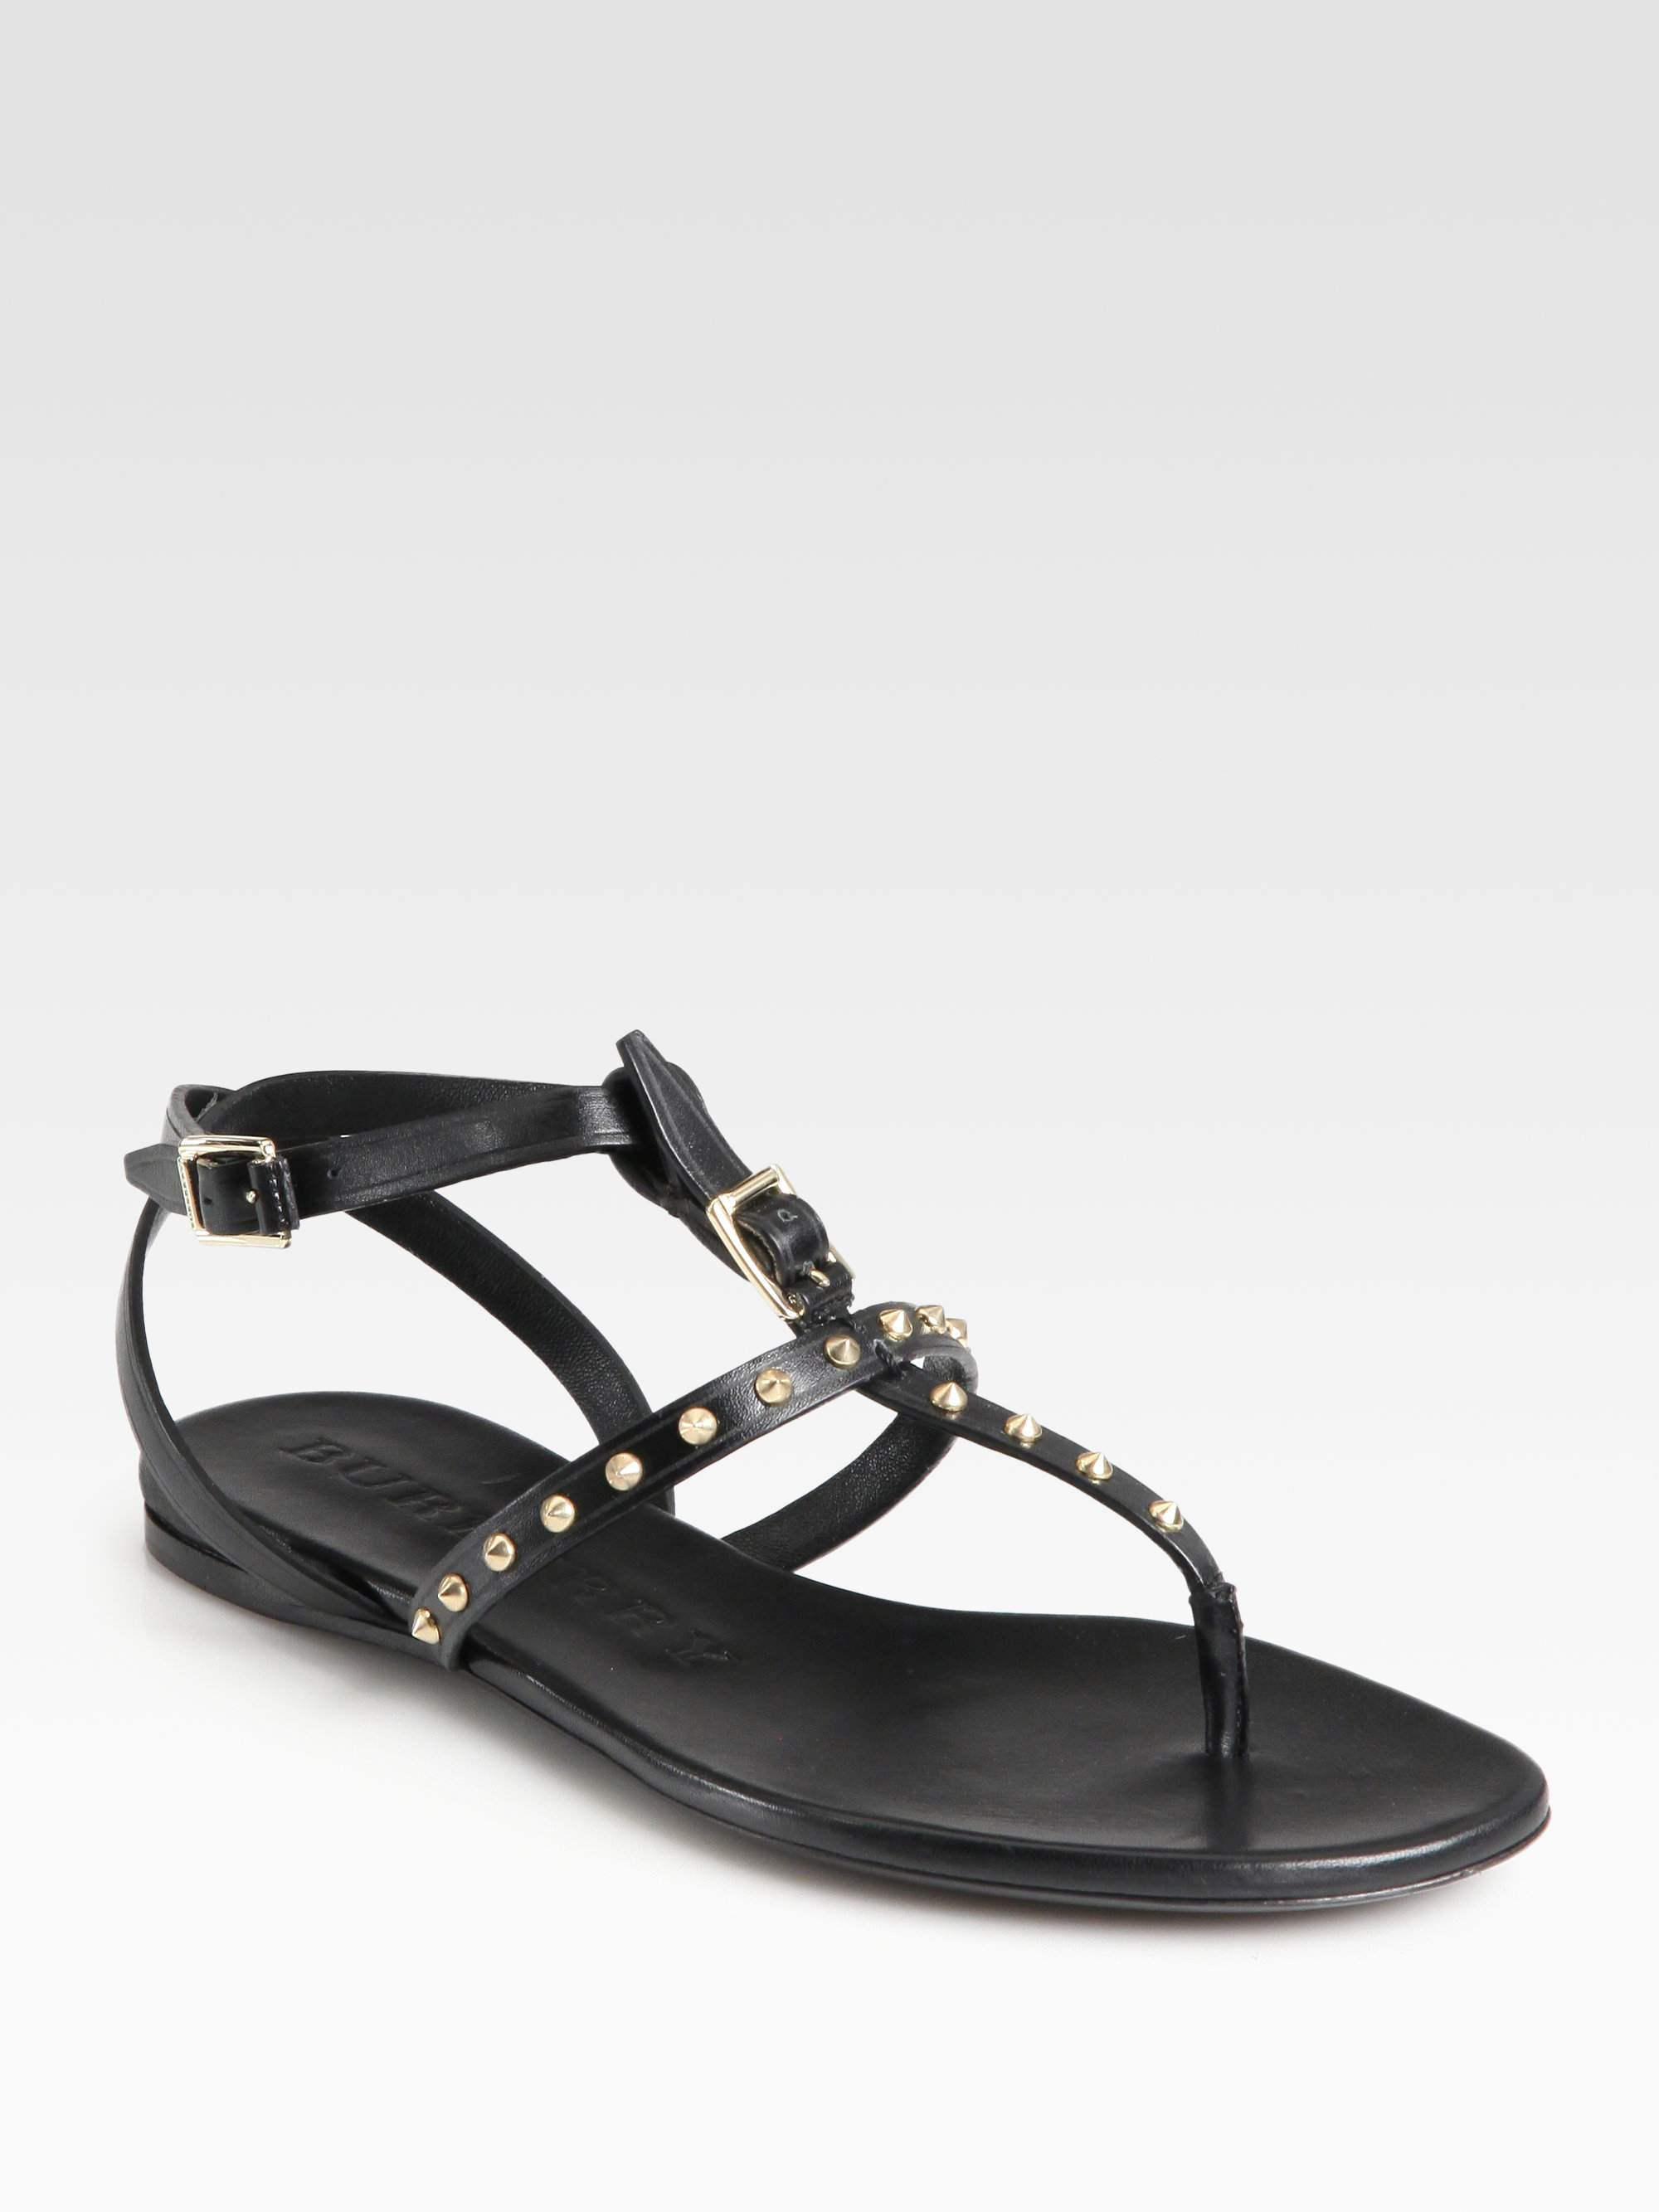 Burberry Masefield Studded Leather T-Strap Sandals in Black - Lyst